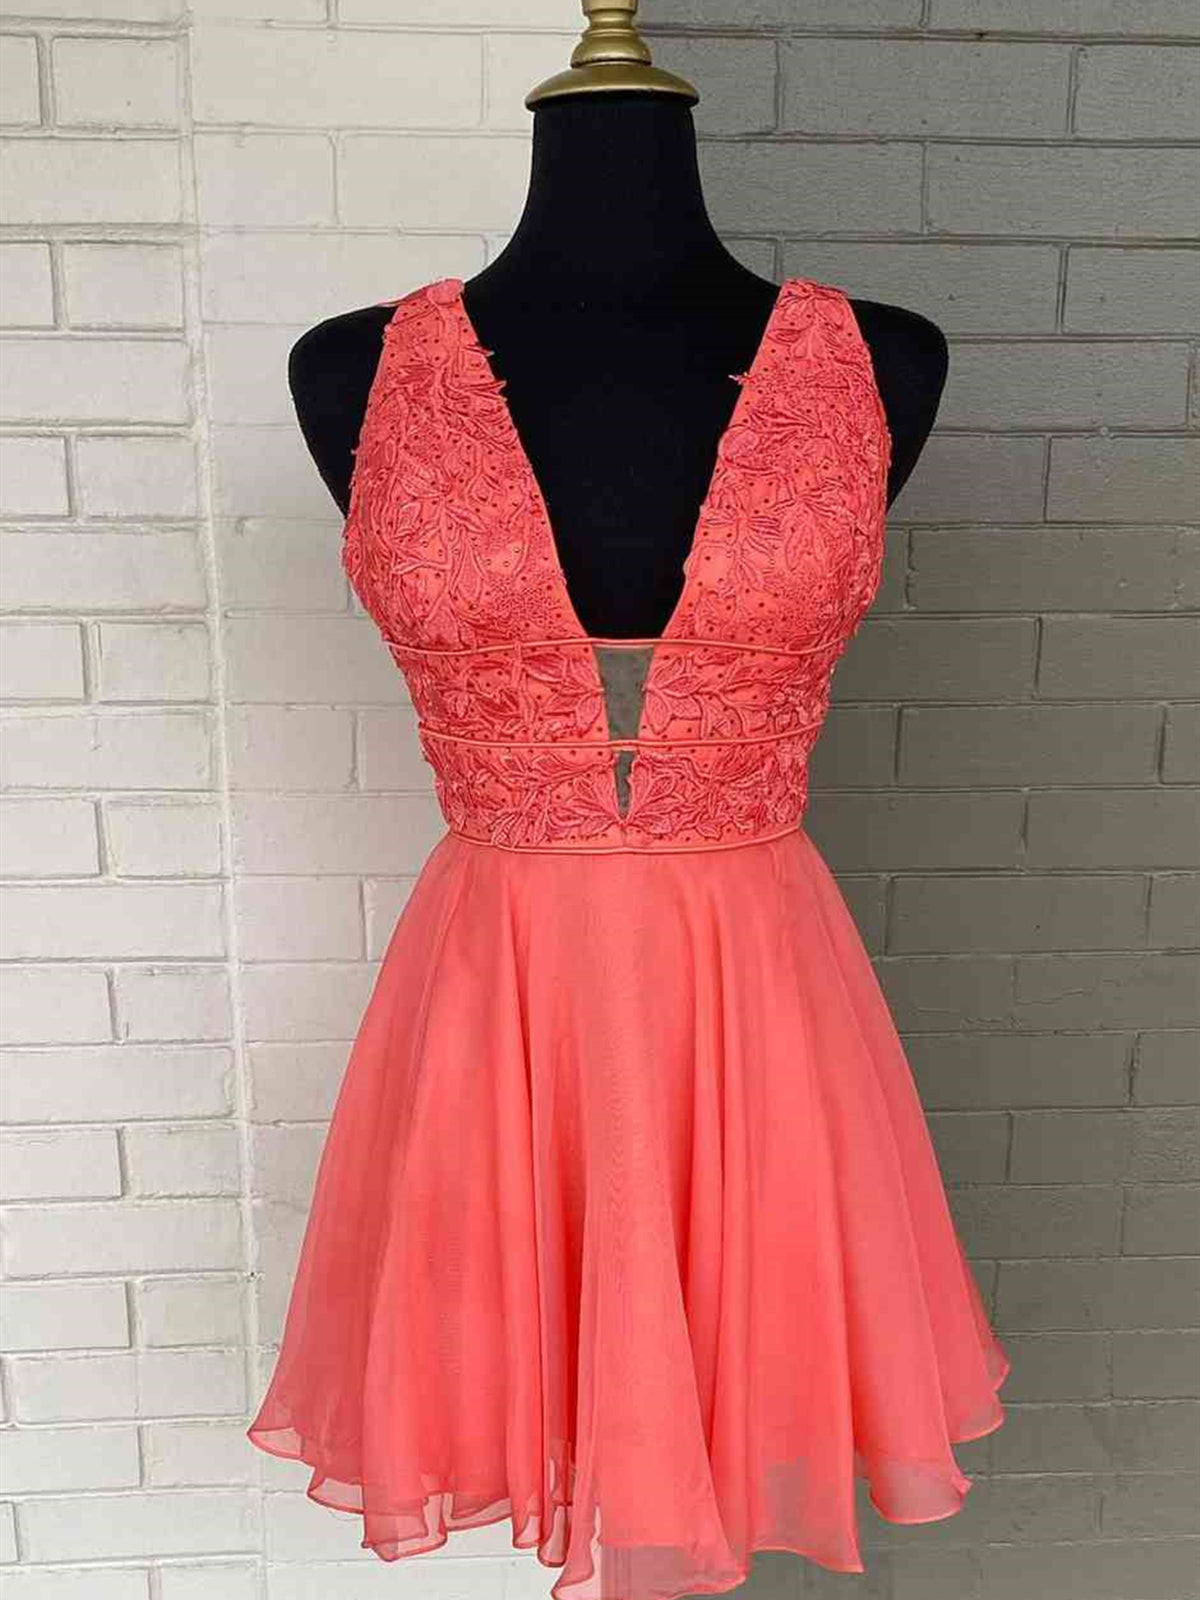 Prom Dress Pink, Short V Neck Coral Lace Prom Dresses, V Neck Coral Lace Formal Homecoming Dresses